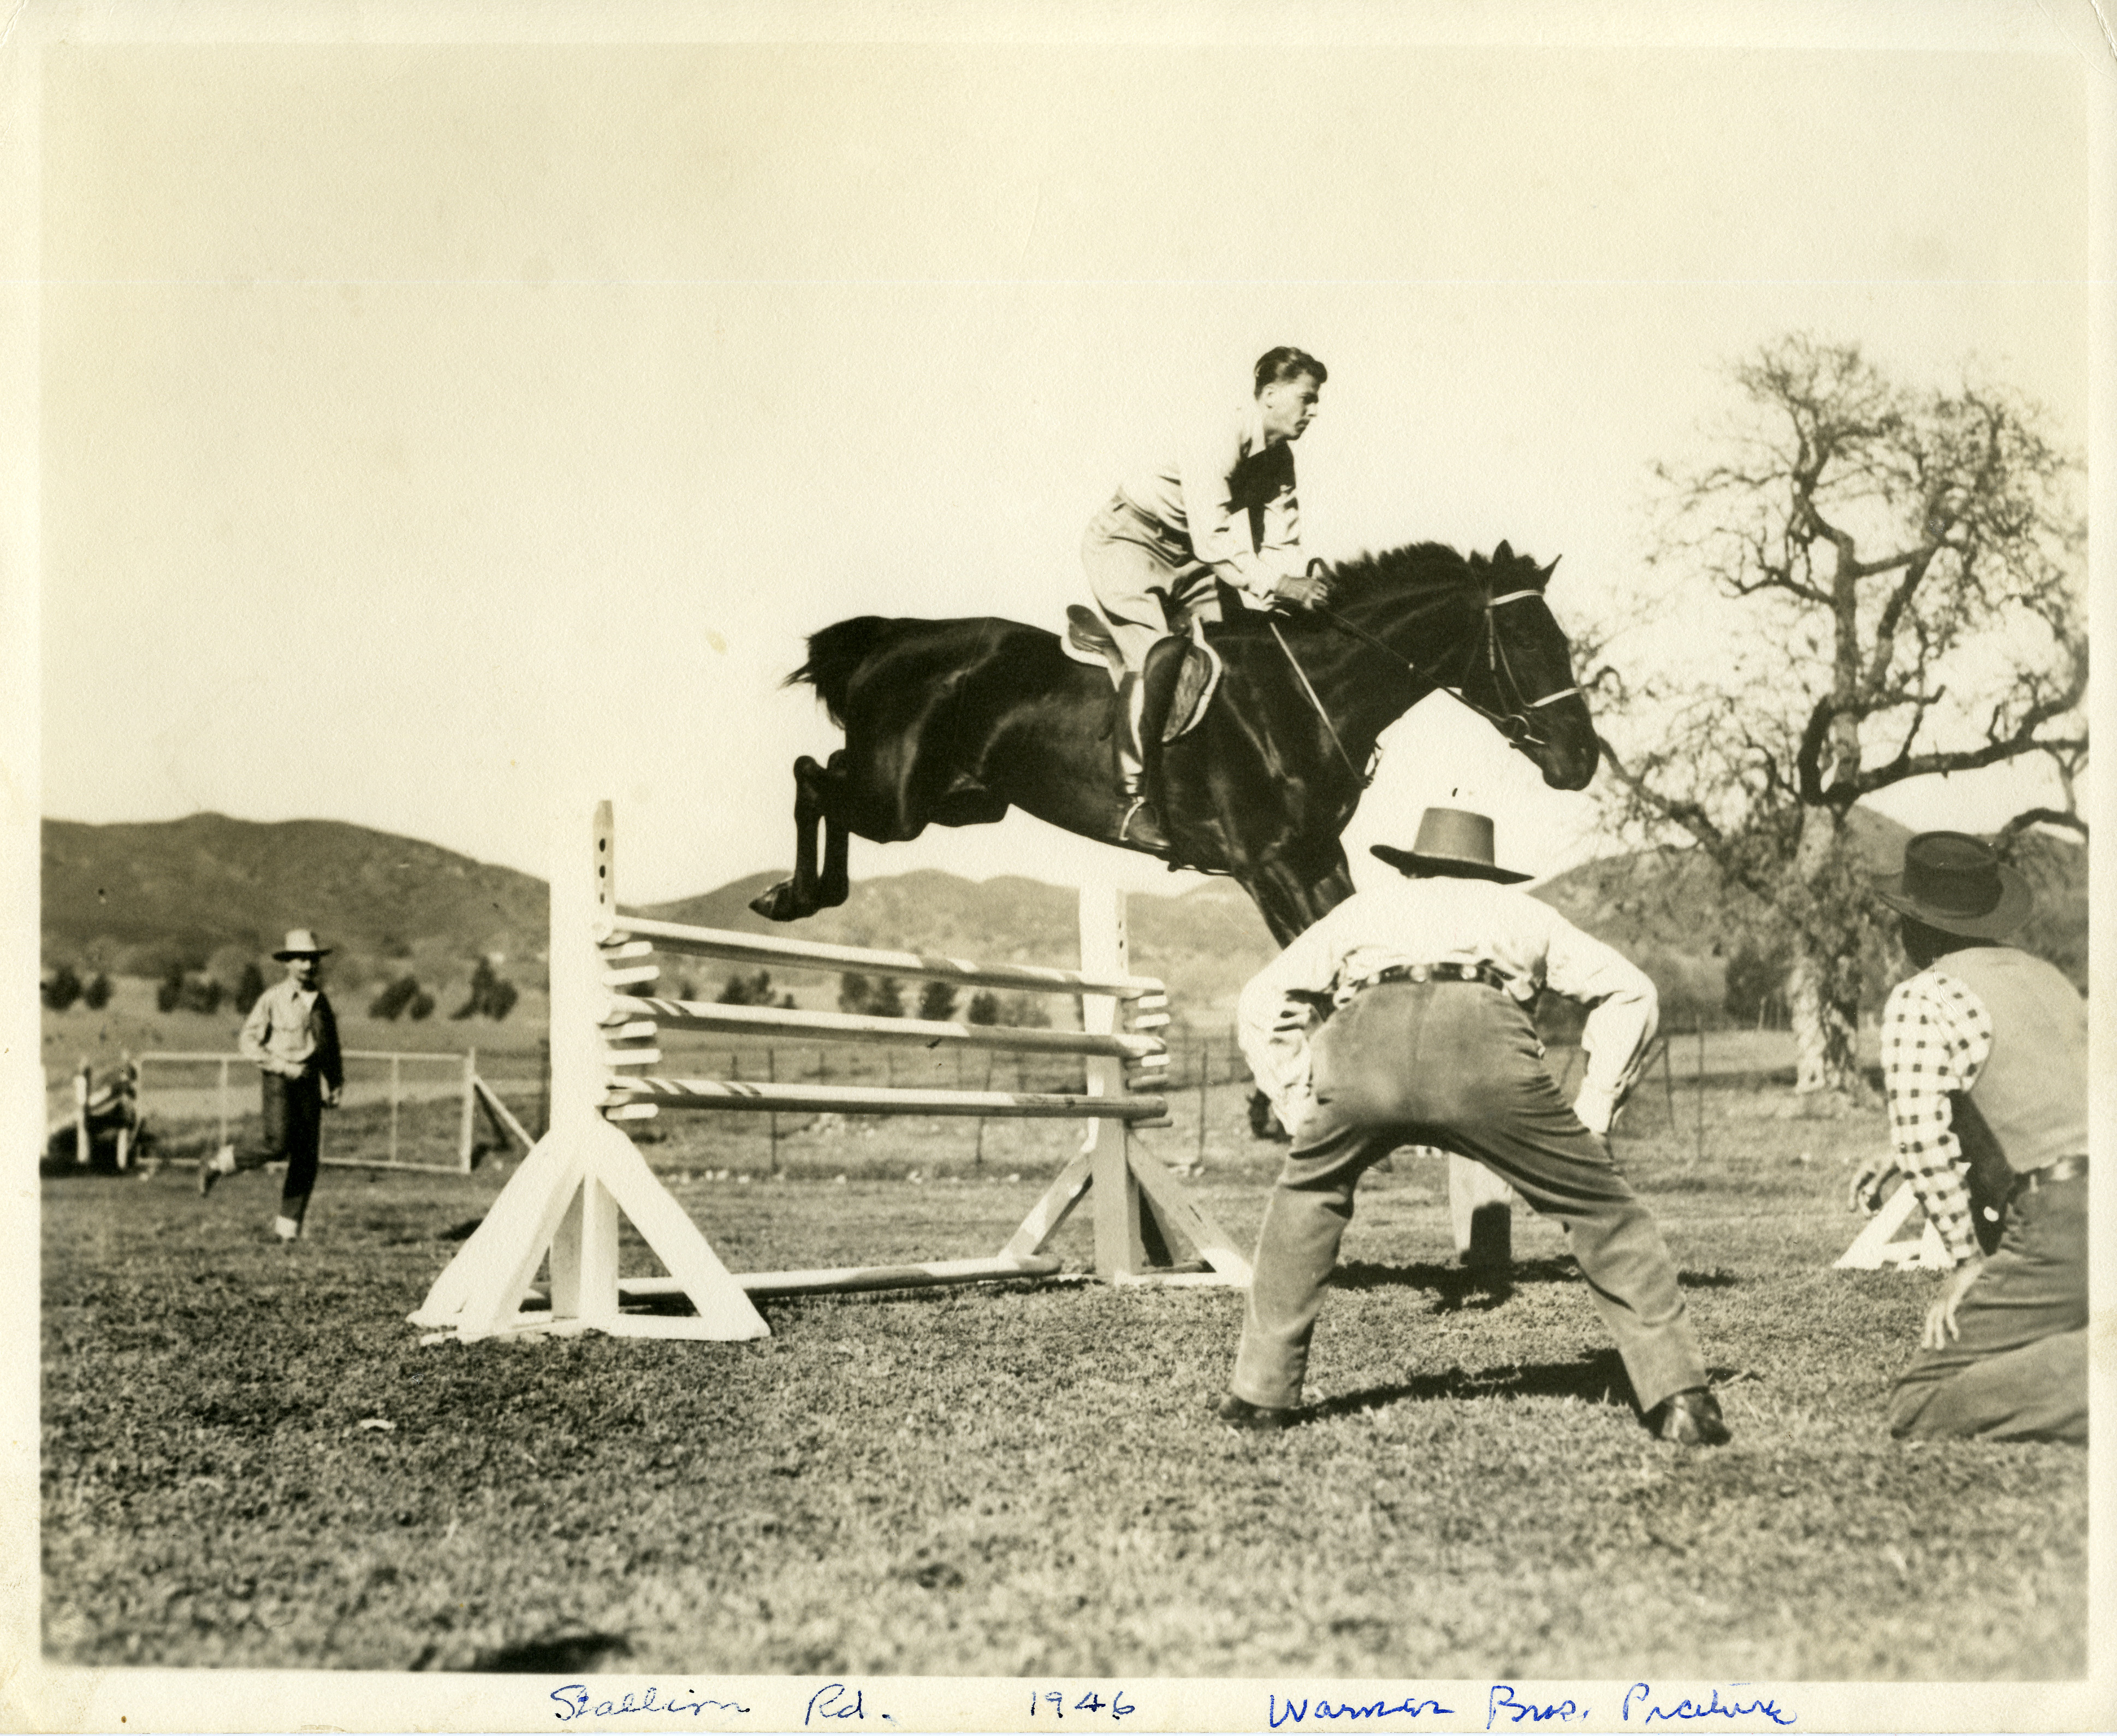 Ronald Reagan jumping a horse “Baby” in film “Stallion Road”